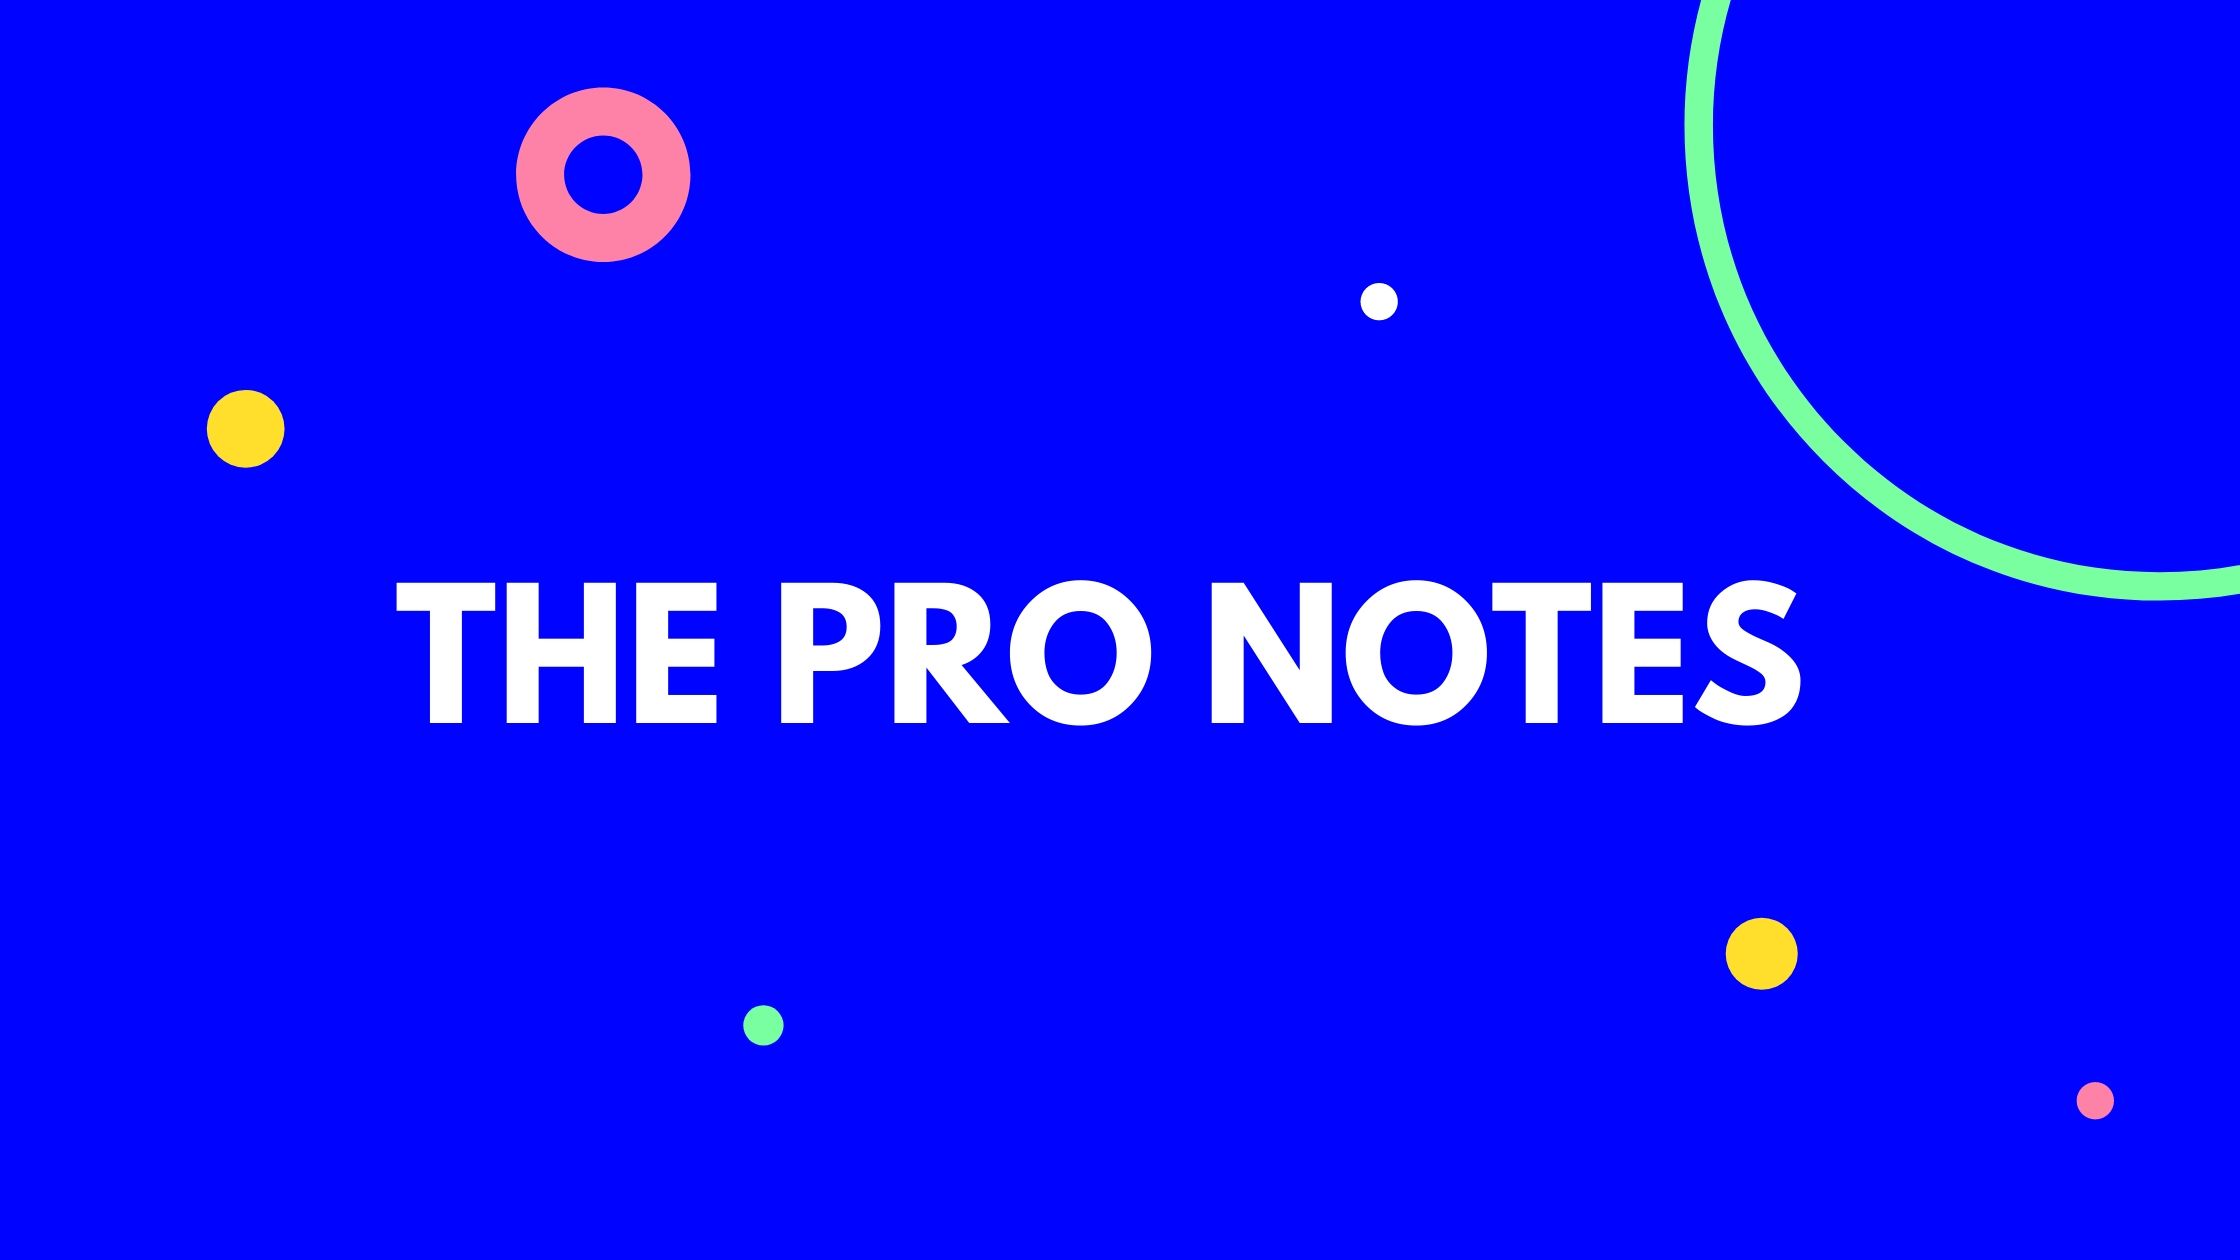 The Pro Notes